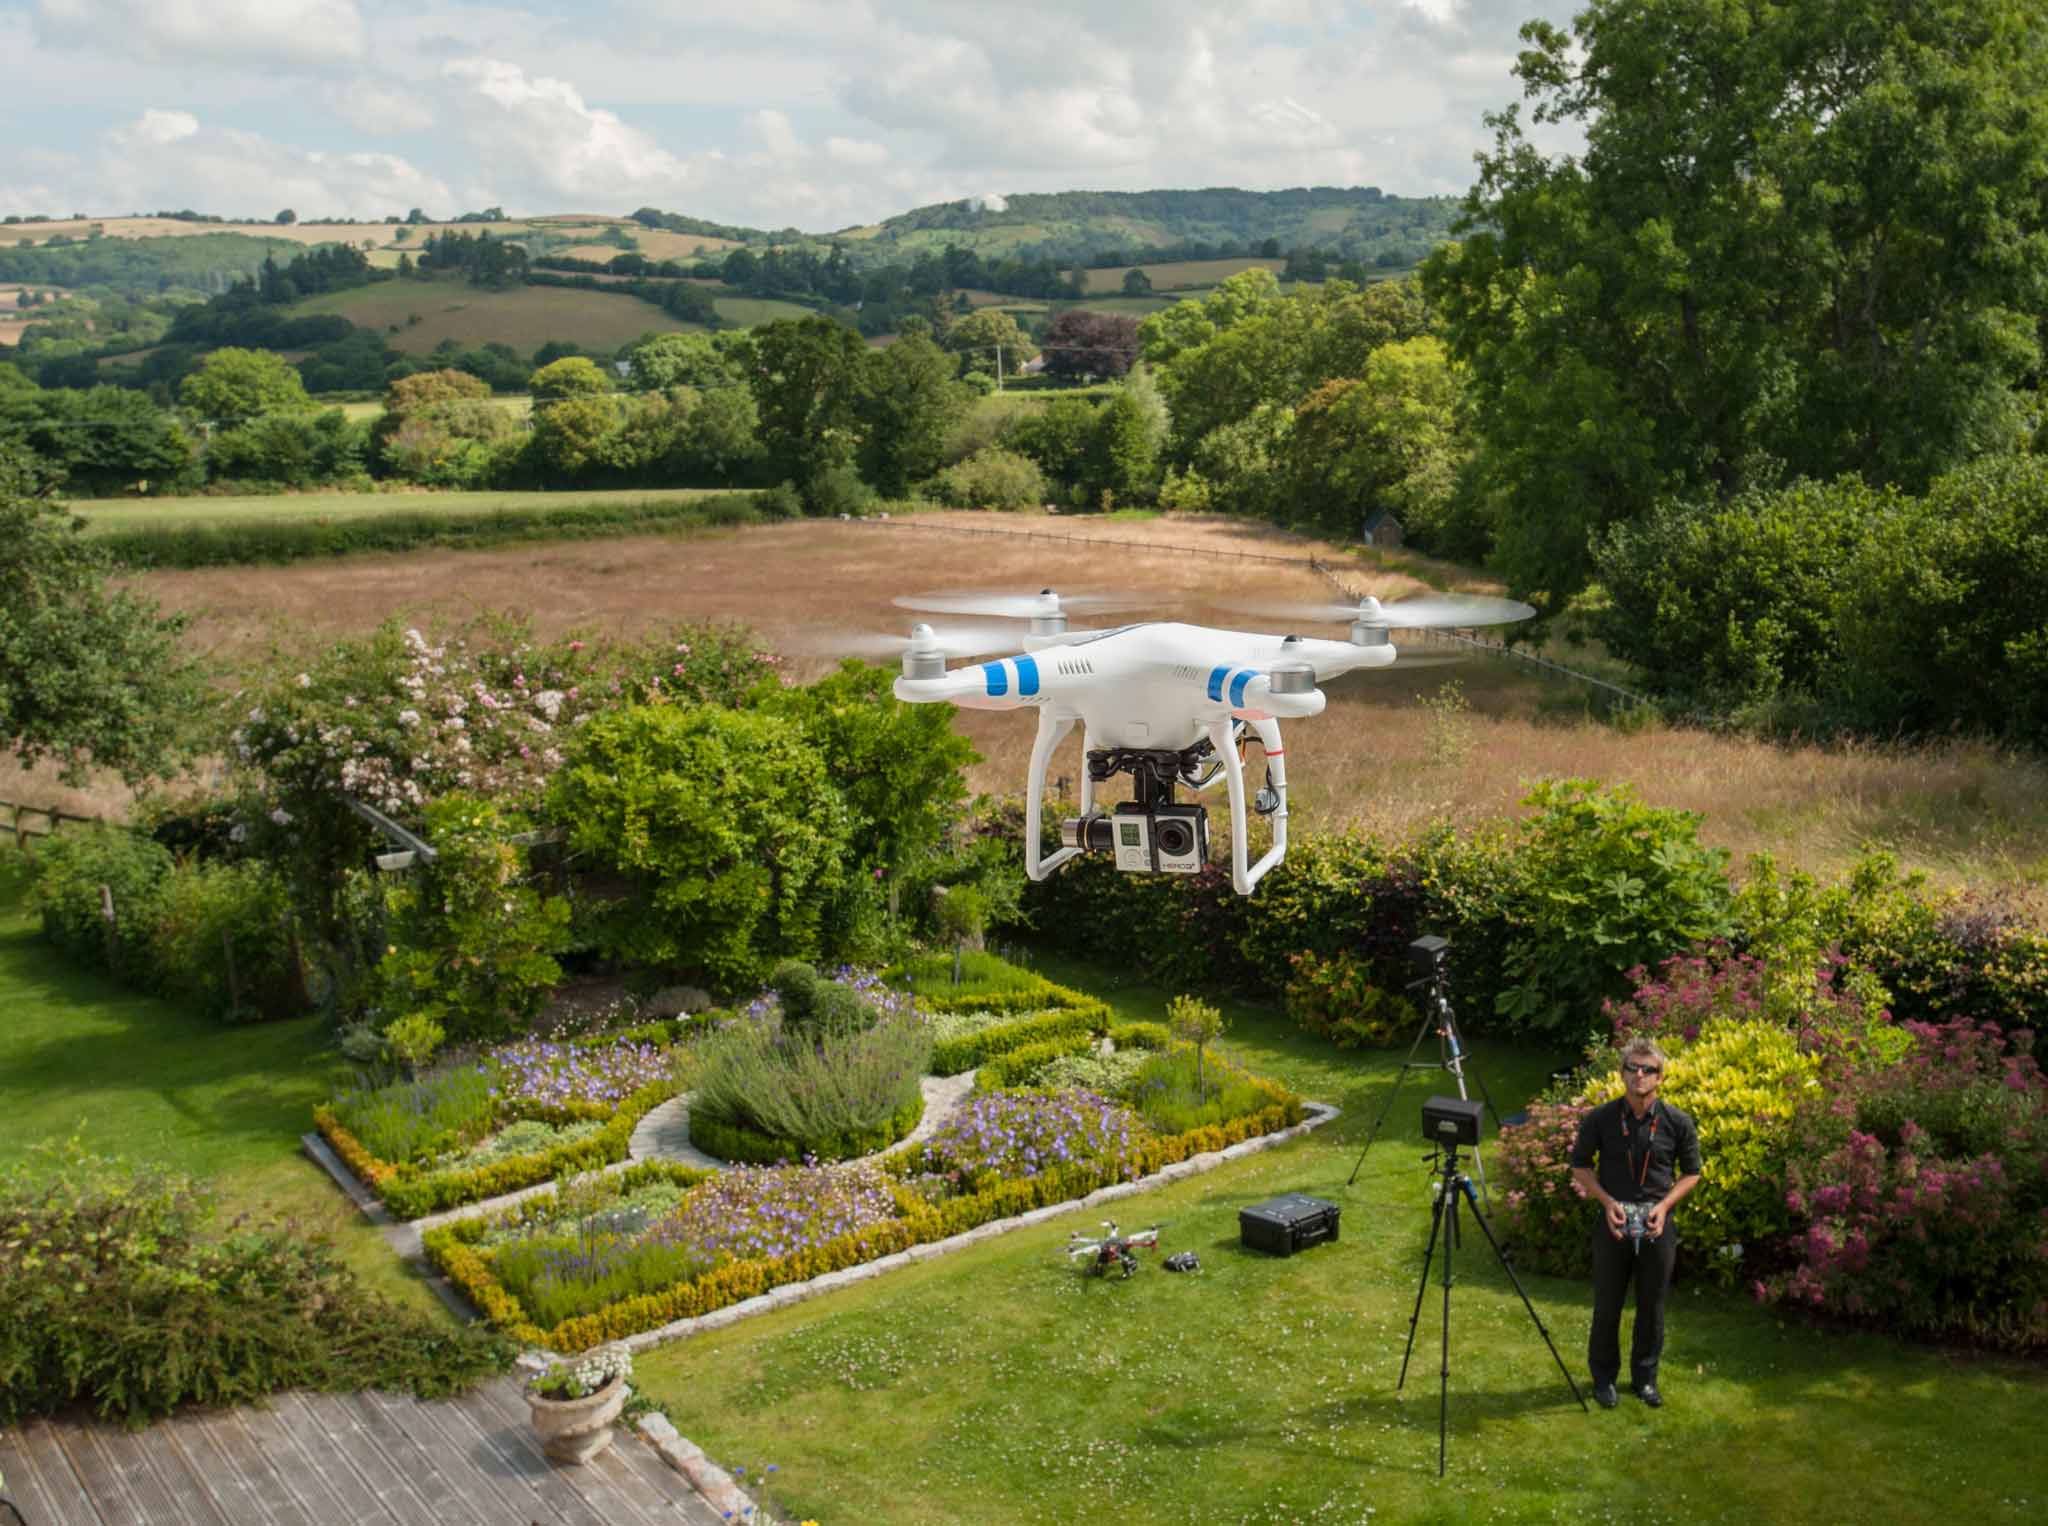 Rob Stoyle flies the new 'property drone'